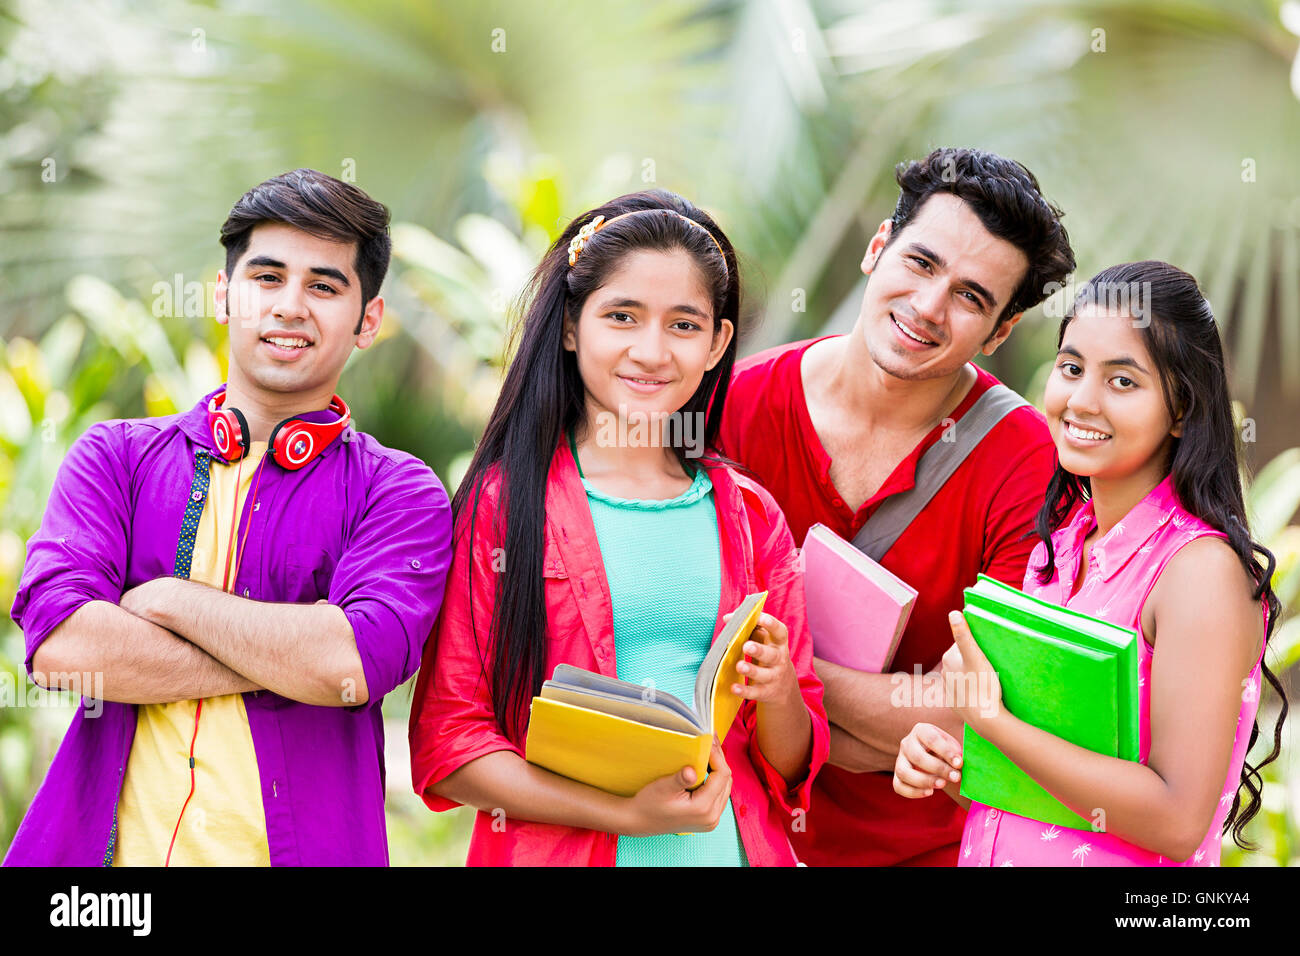 5 Young Girls and Boys Friends College Student Park Standing  Book Studying Stock Photo